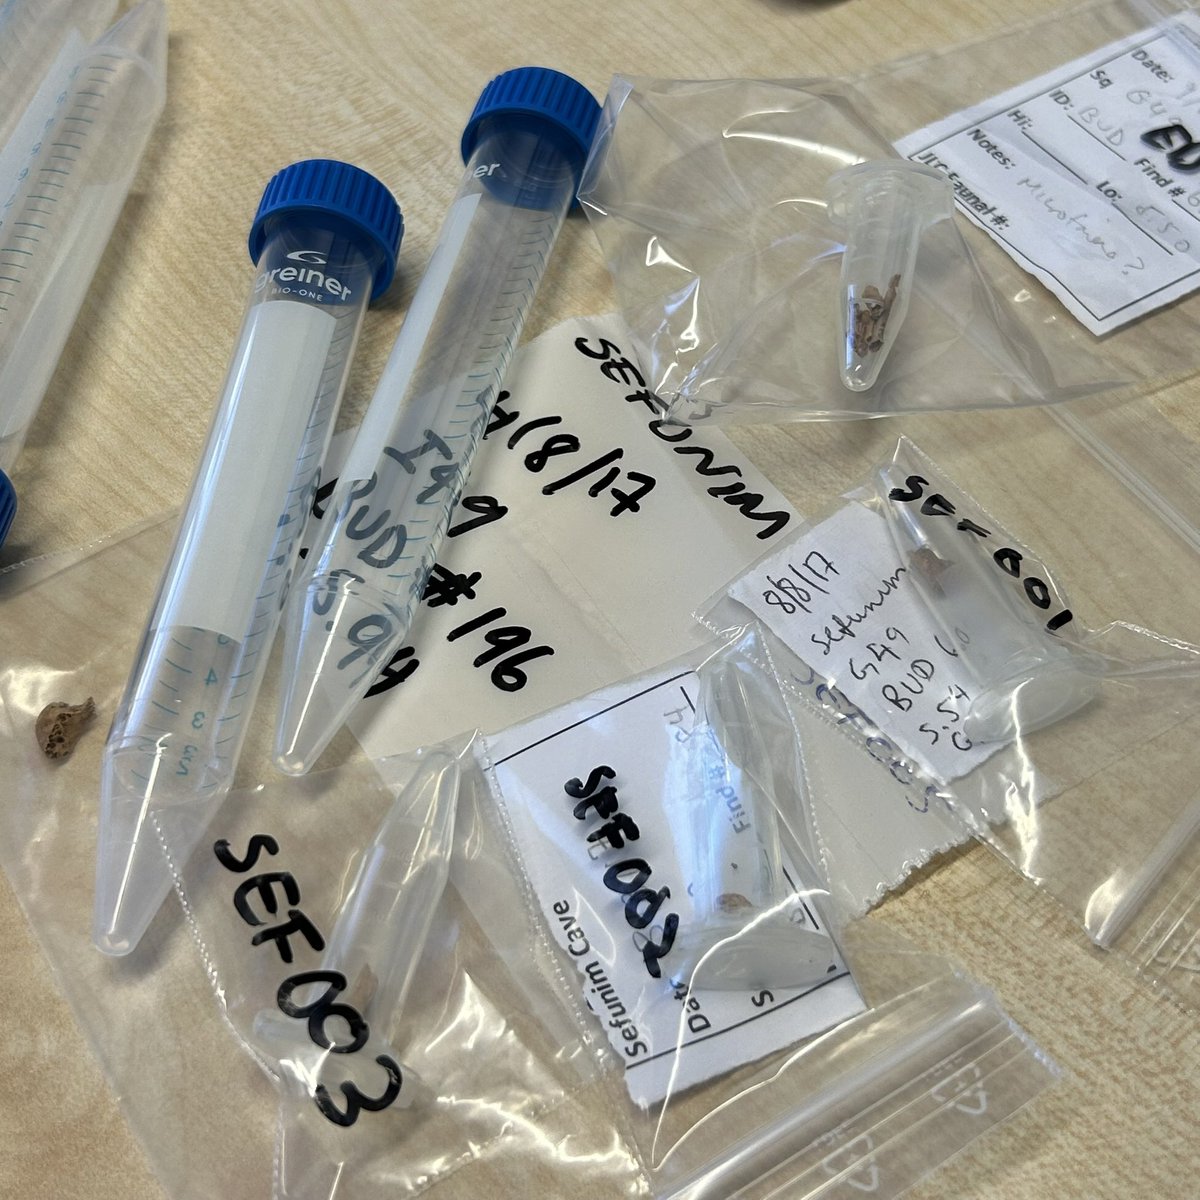 PaleoBIRD IS GO!! The first samples from Sefunim Cave are hitting the EDTA today. Lets see what the stable isotope values can tell us about the pigeons of square G49! #soexcited #heyholetsgo #stableisotopes #archaeology #palaeolithic #thepaleobirdproject